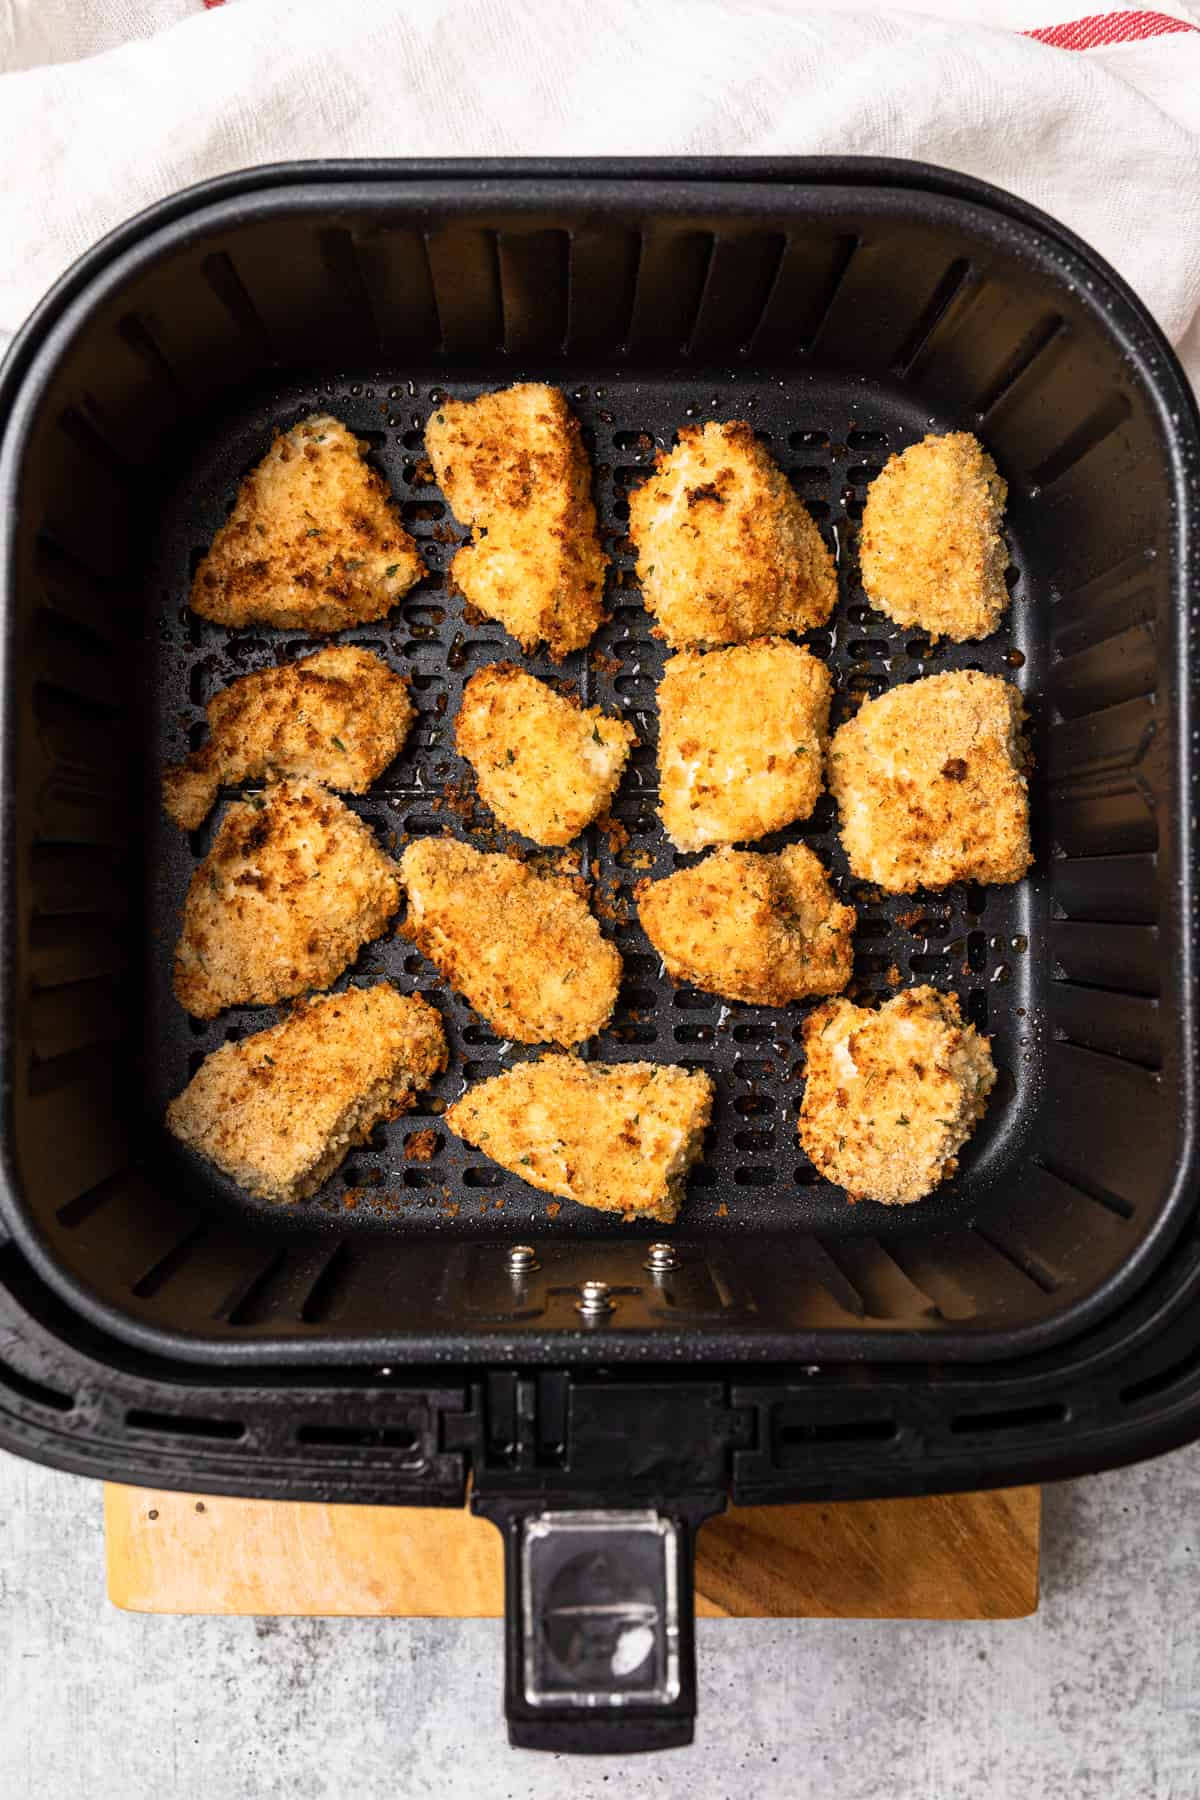 chicken pieces after being air fried